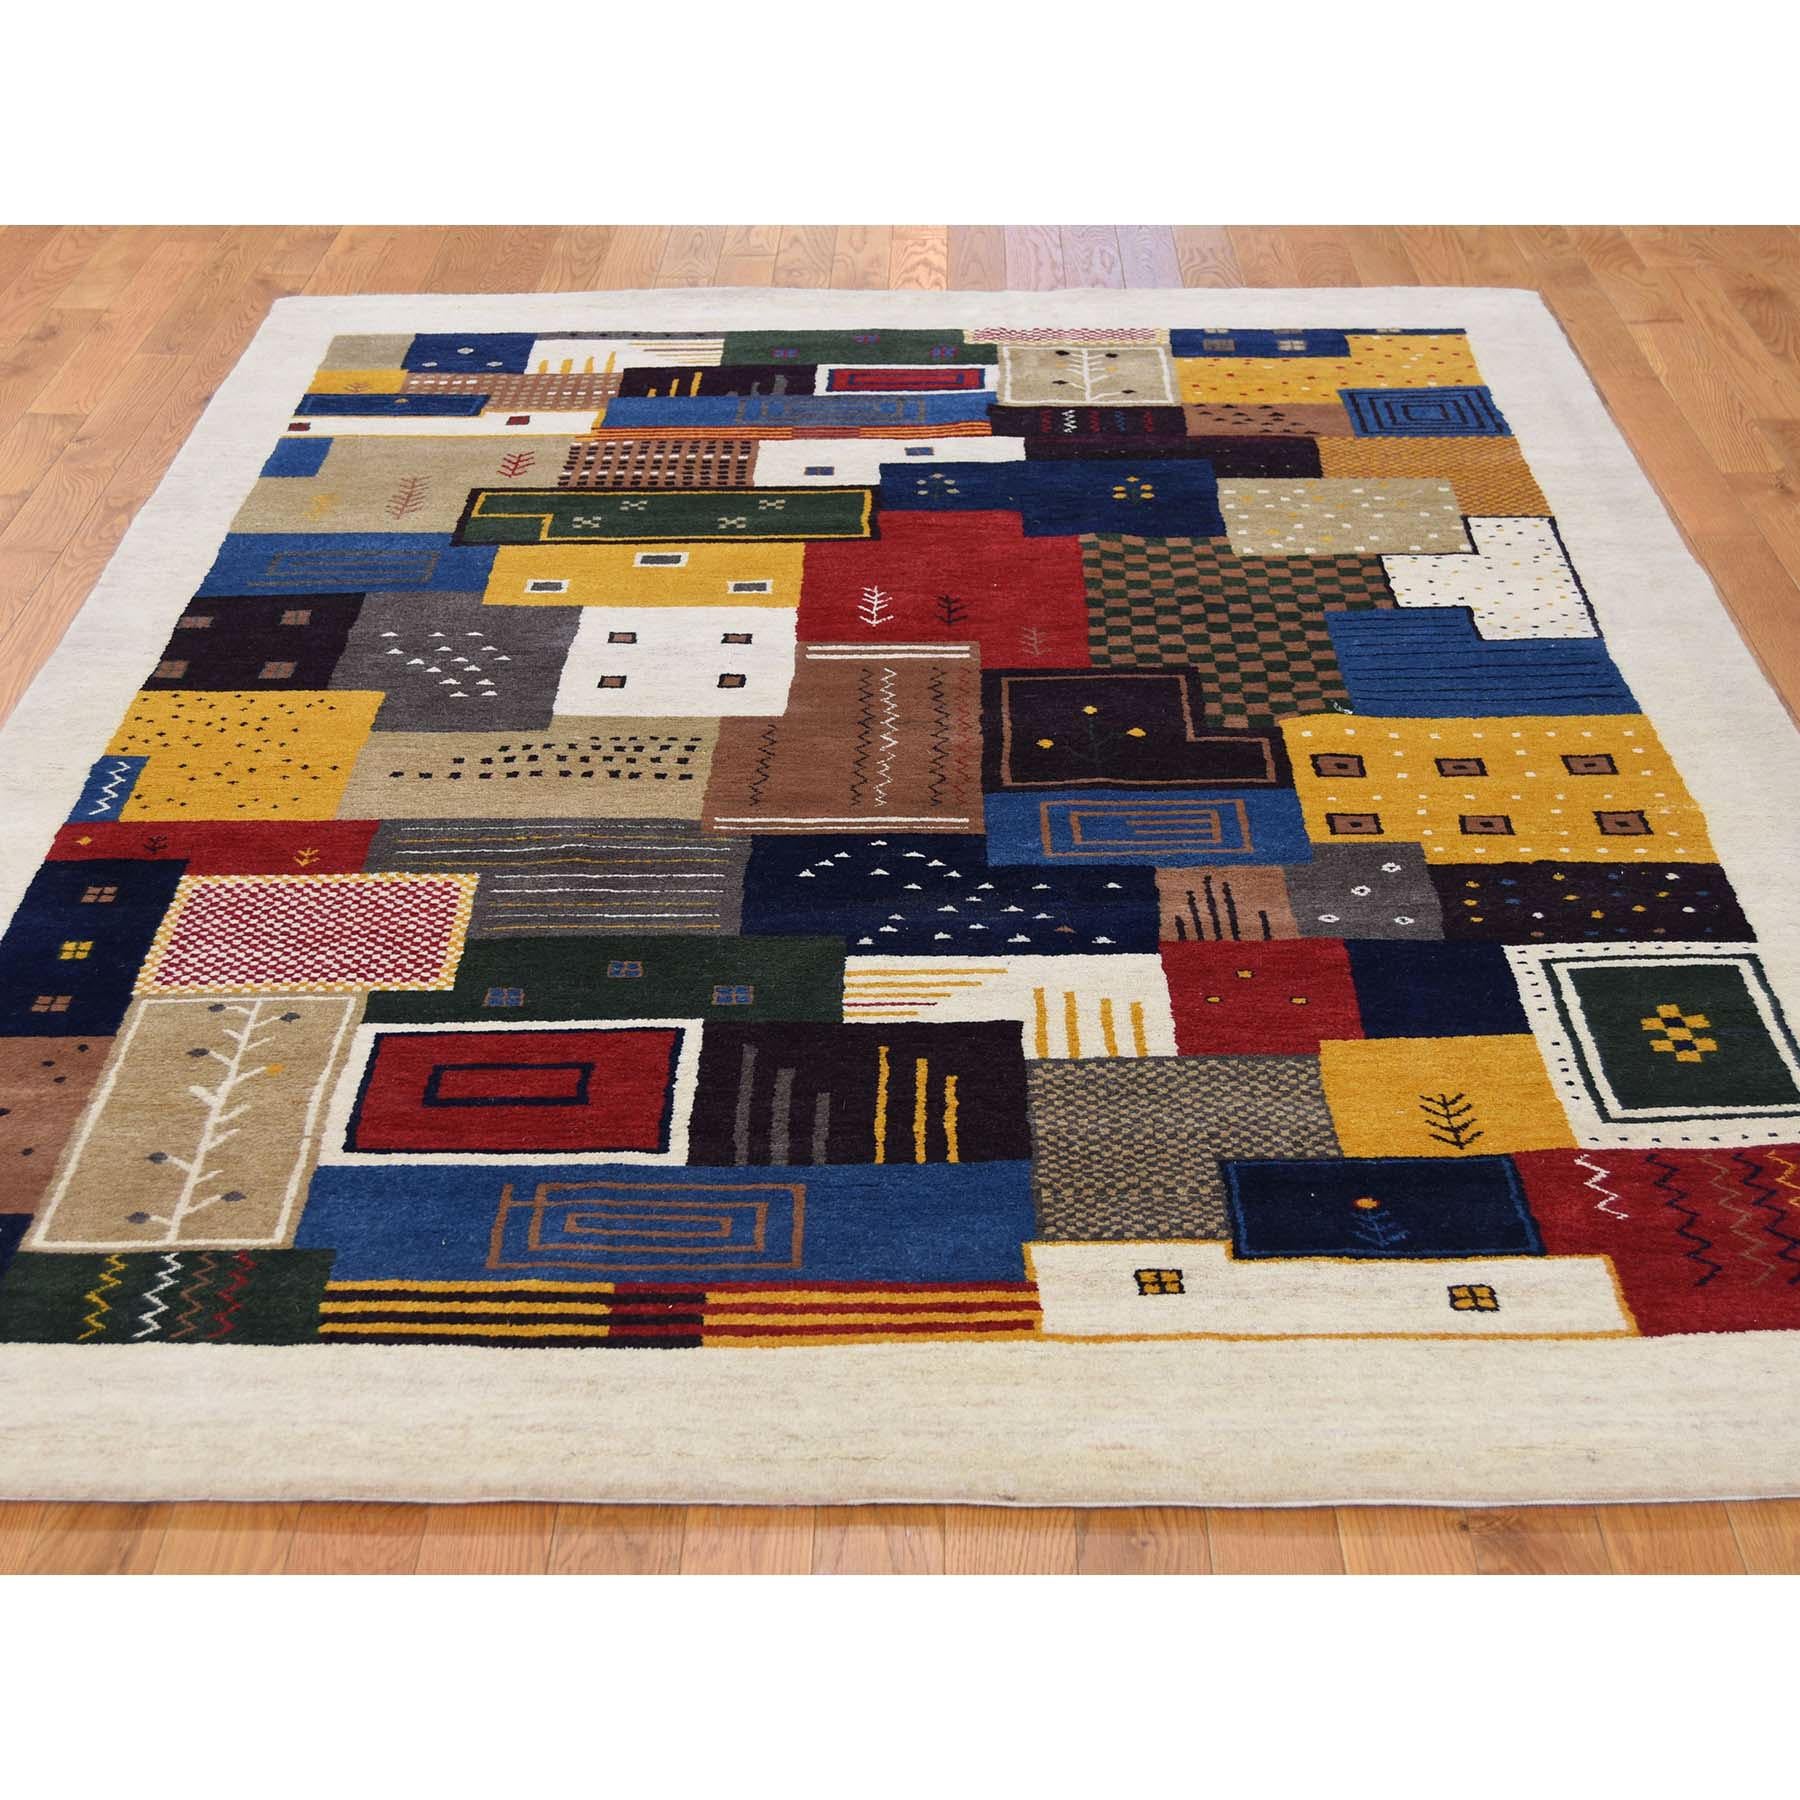 This is a truly genuine one-of-a-kind Persian wool handmade Lori Buft Gabbeh patchwork design rug. It has been knotted for months and months in the centuries-old Persian weaving craftsmanship techniques by expert artisans. Measures: 5'9